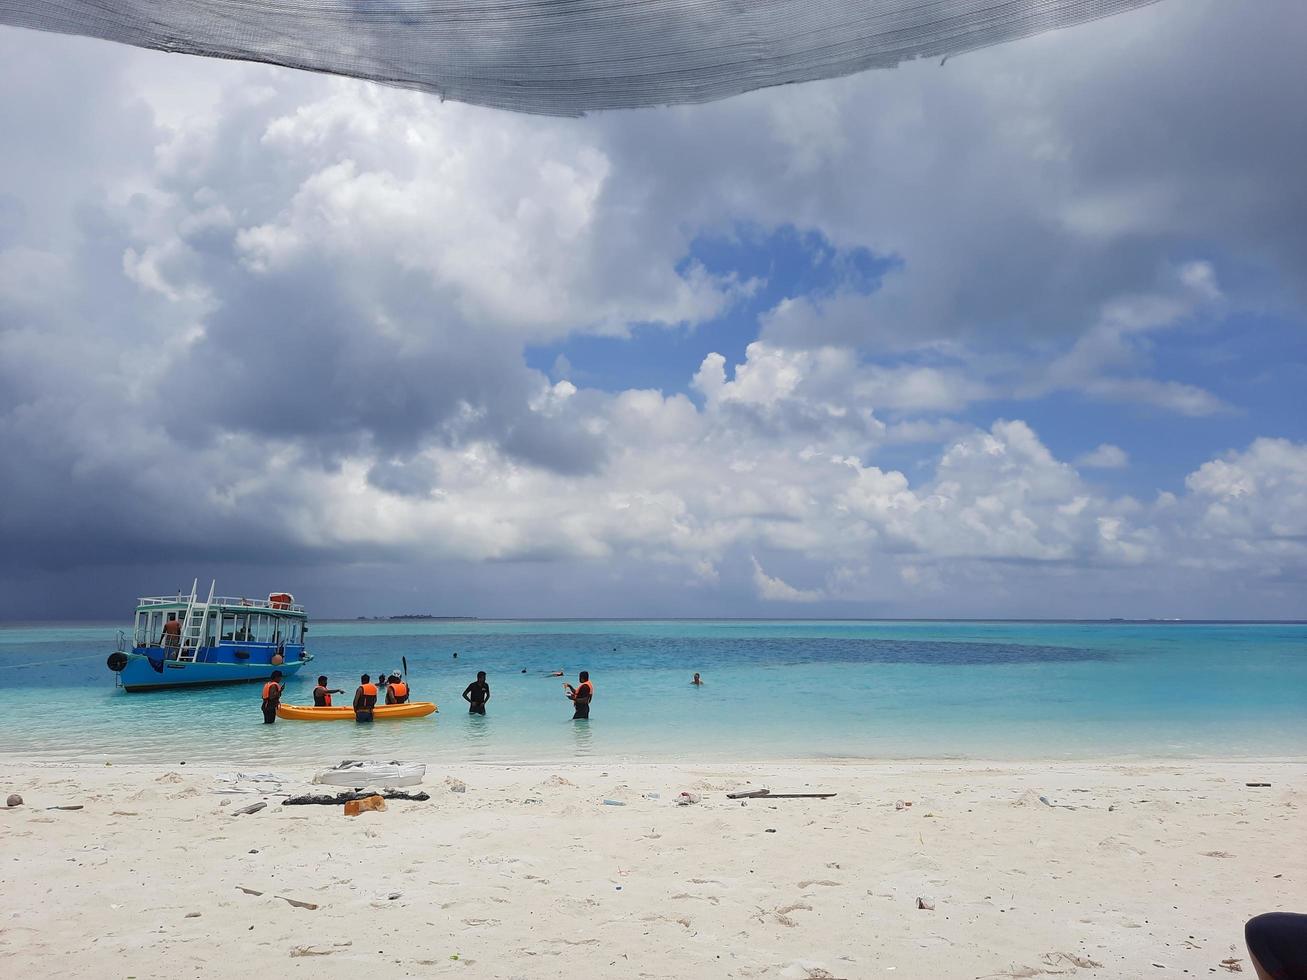 Maldives, April 2021 - Tourists spend the day on a beautiful island in the Maldives. The Maldives is a collection of different islands. Most of the islands are rich in natural beauty. photo